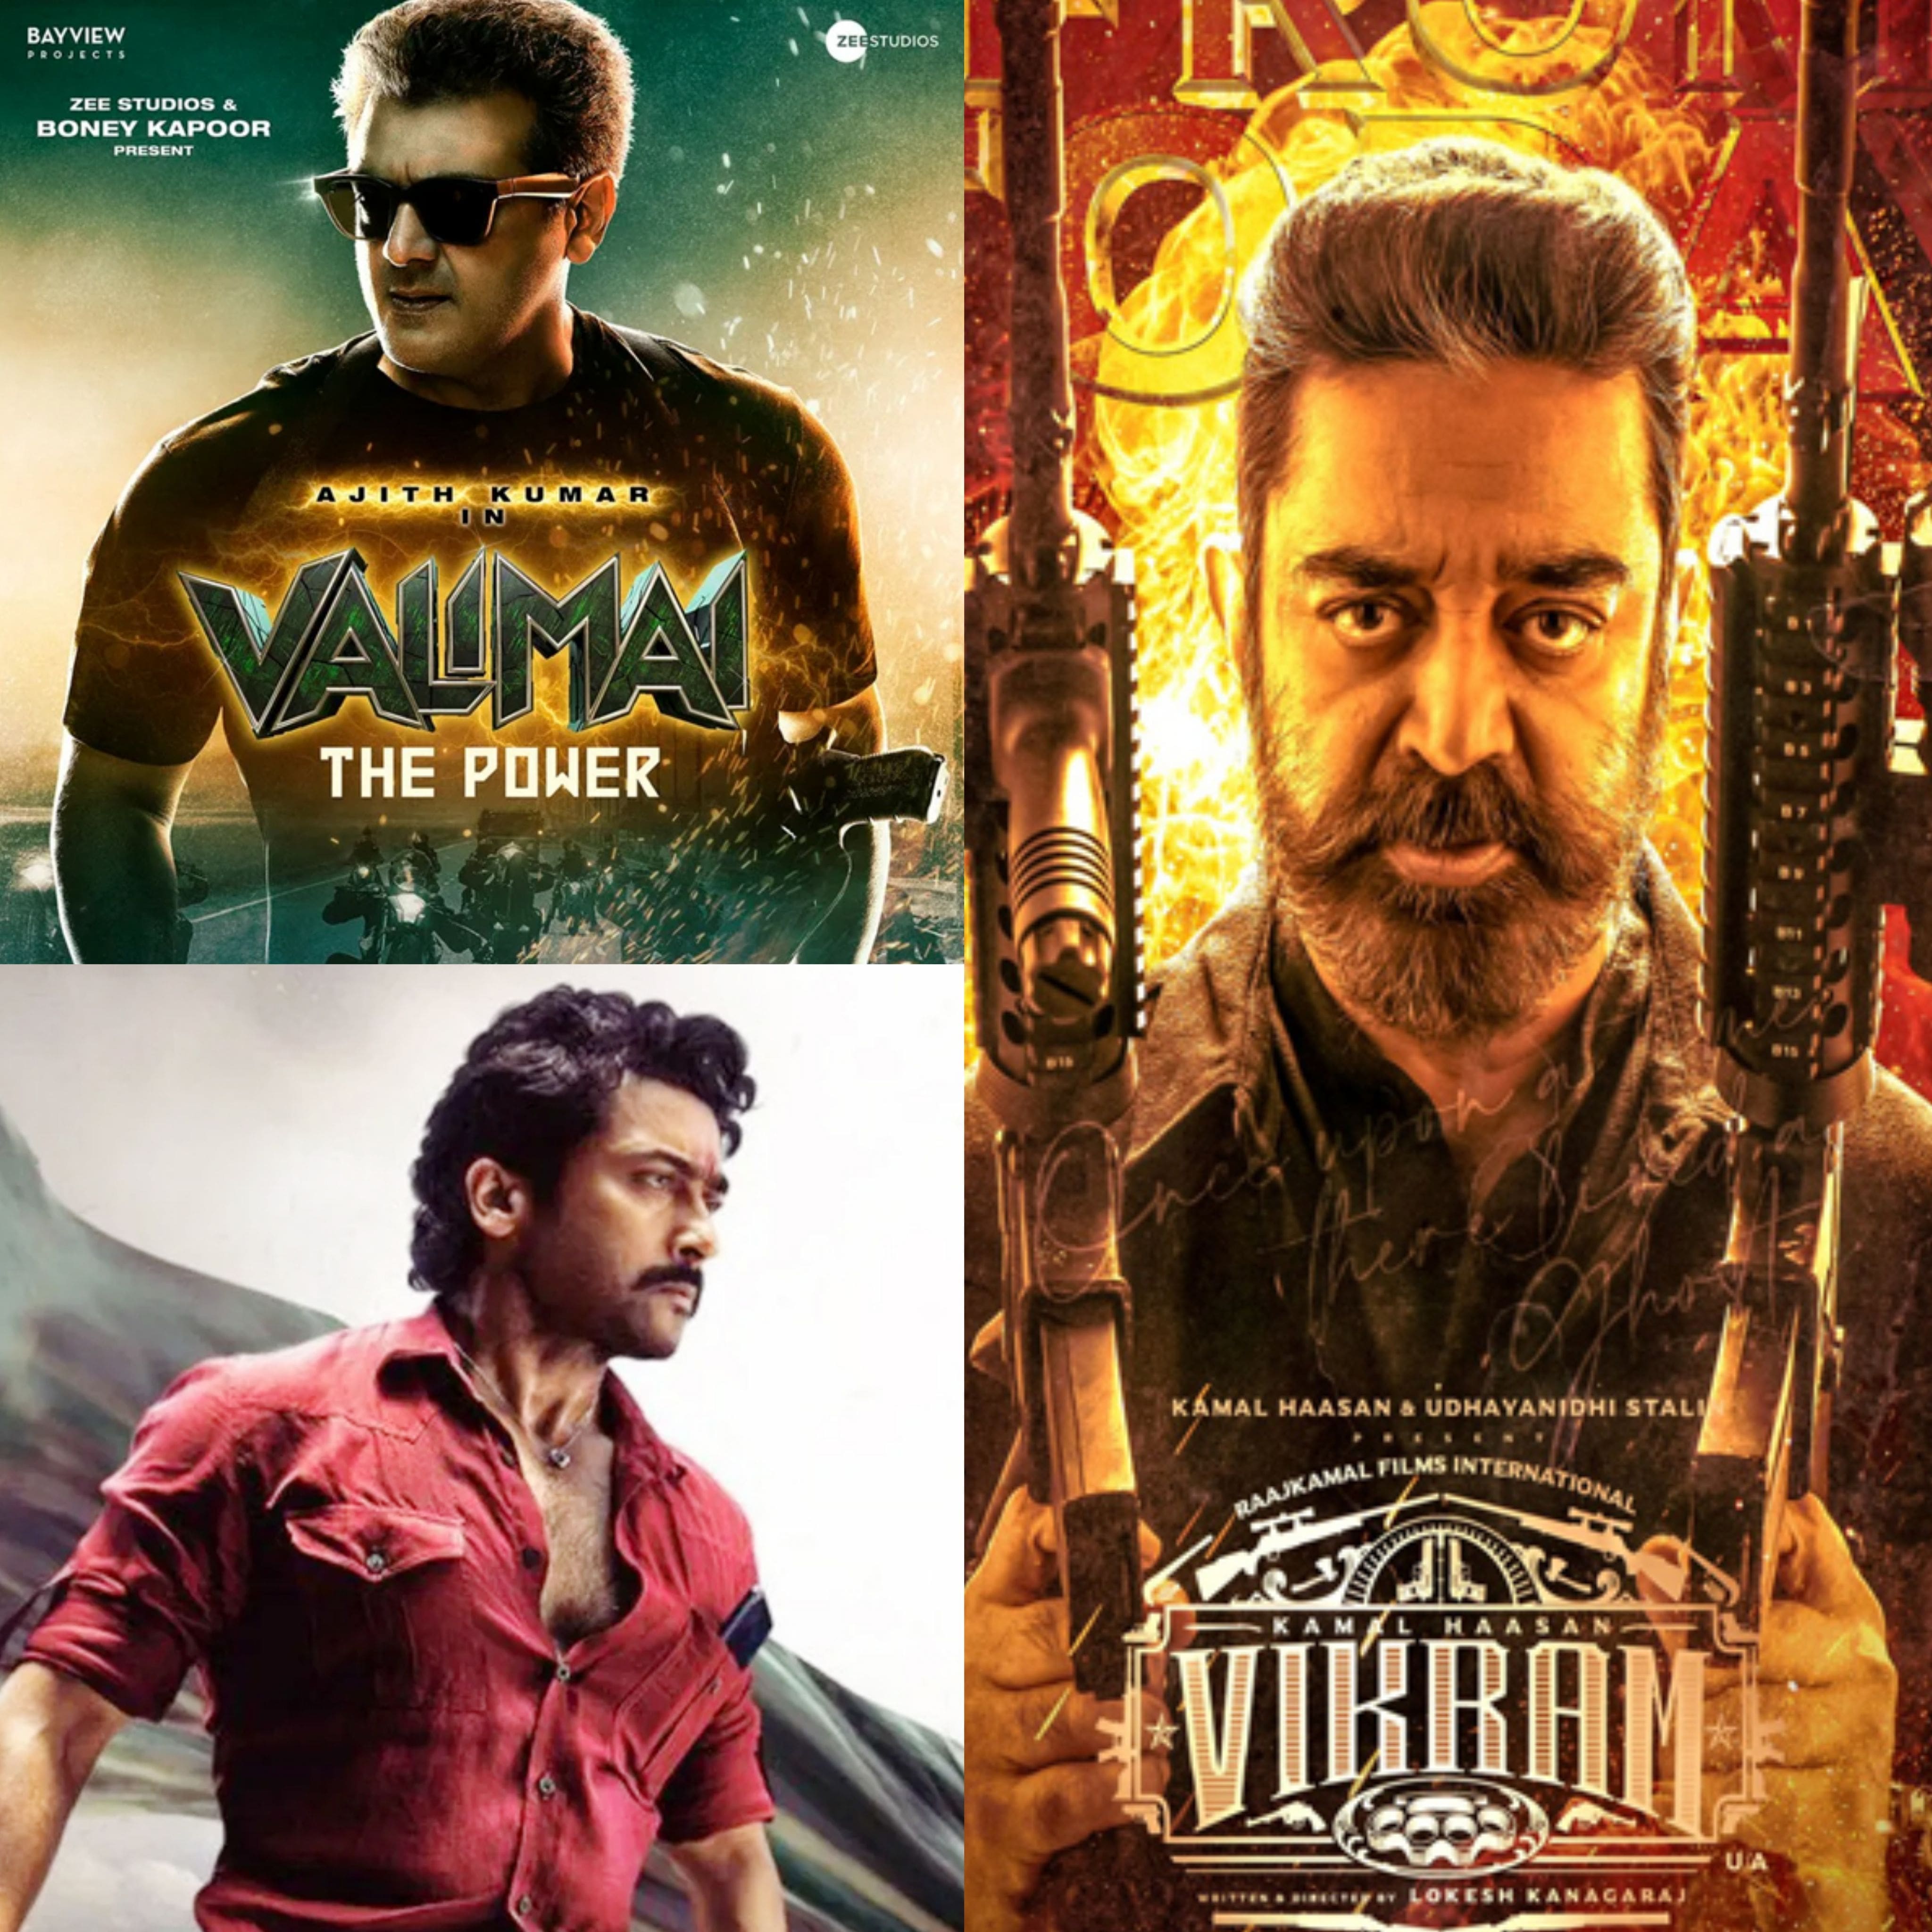 Biggest Tamil movie hits of 2022 at the box office